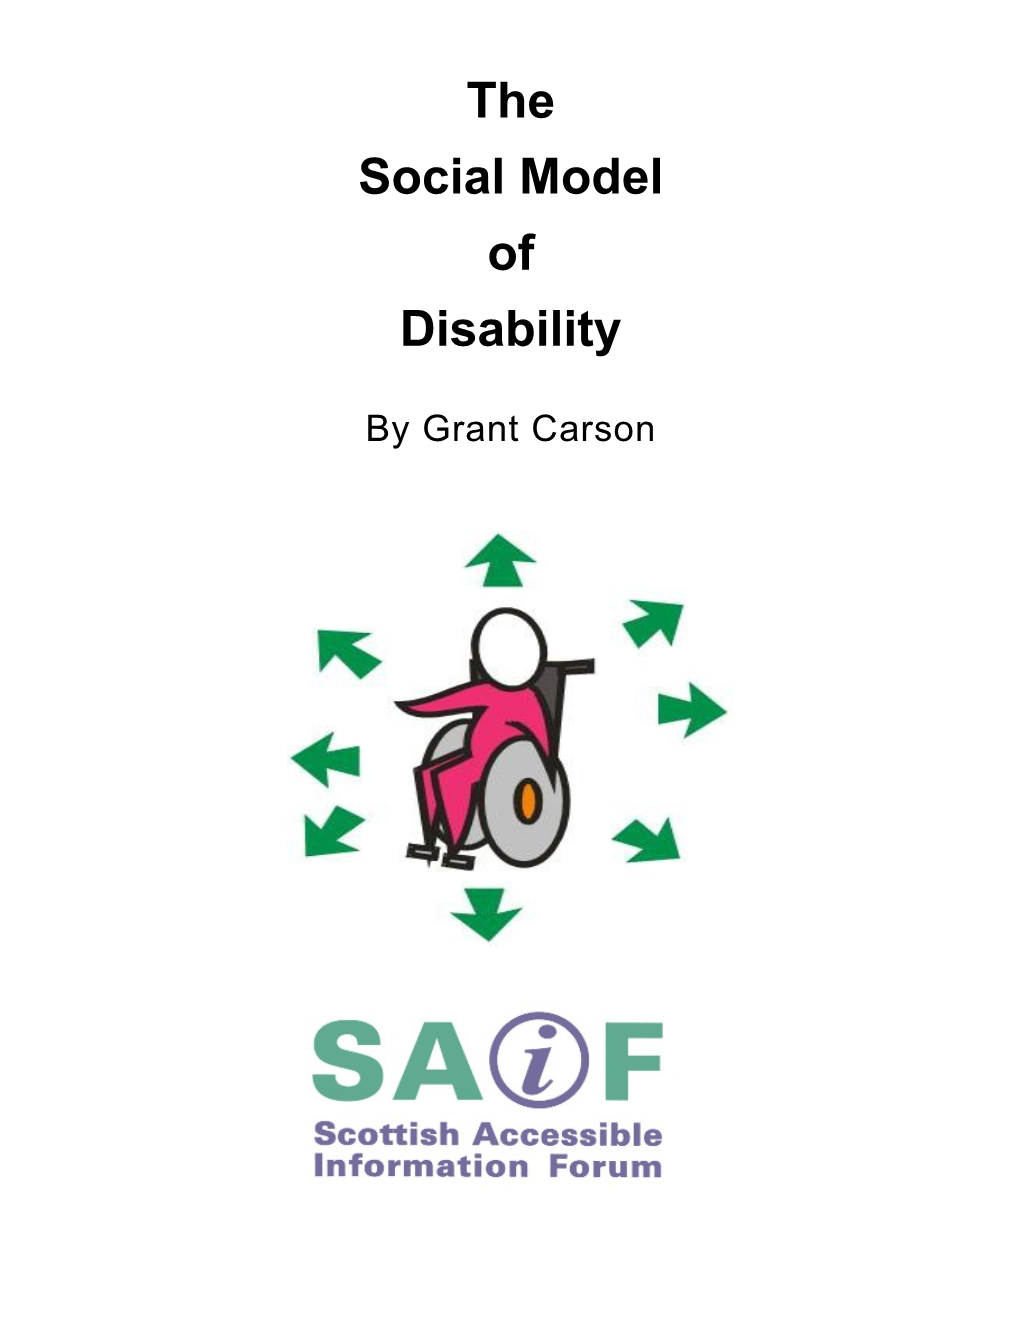 The GLA Rejects the Medical Model of Disability